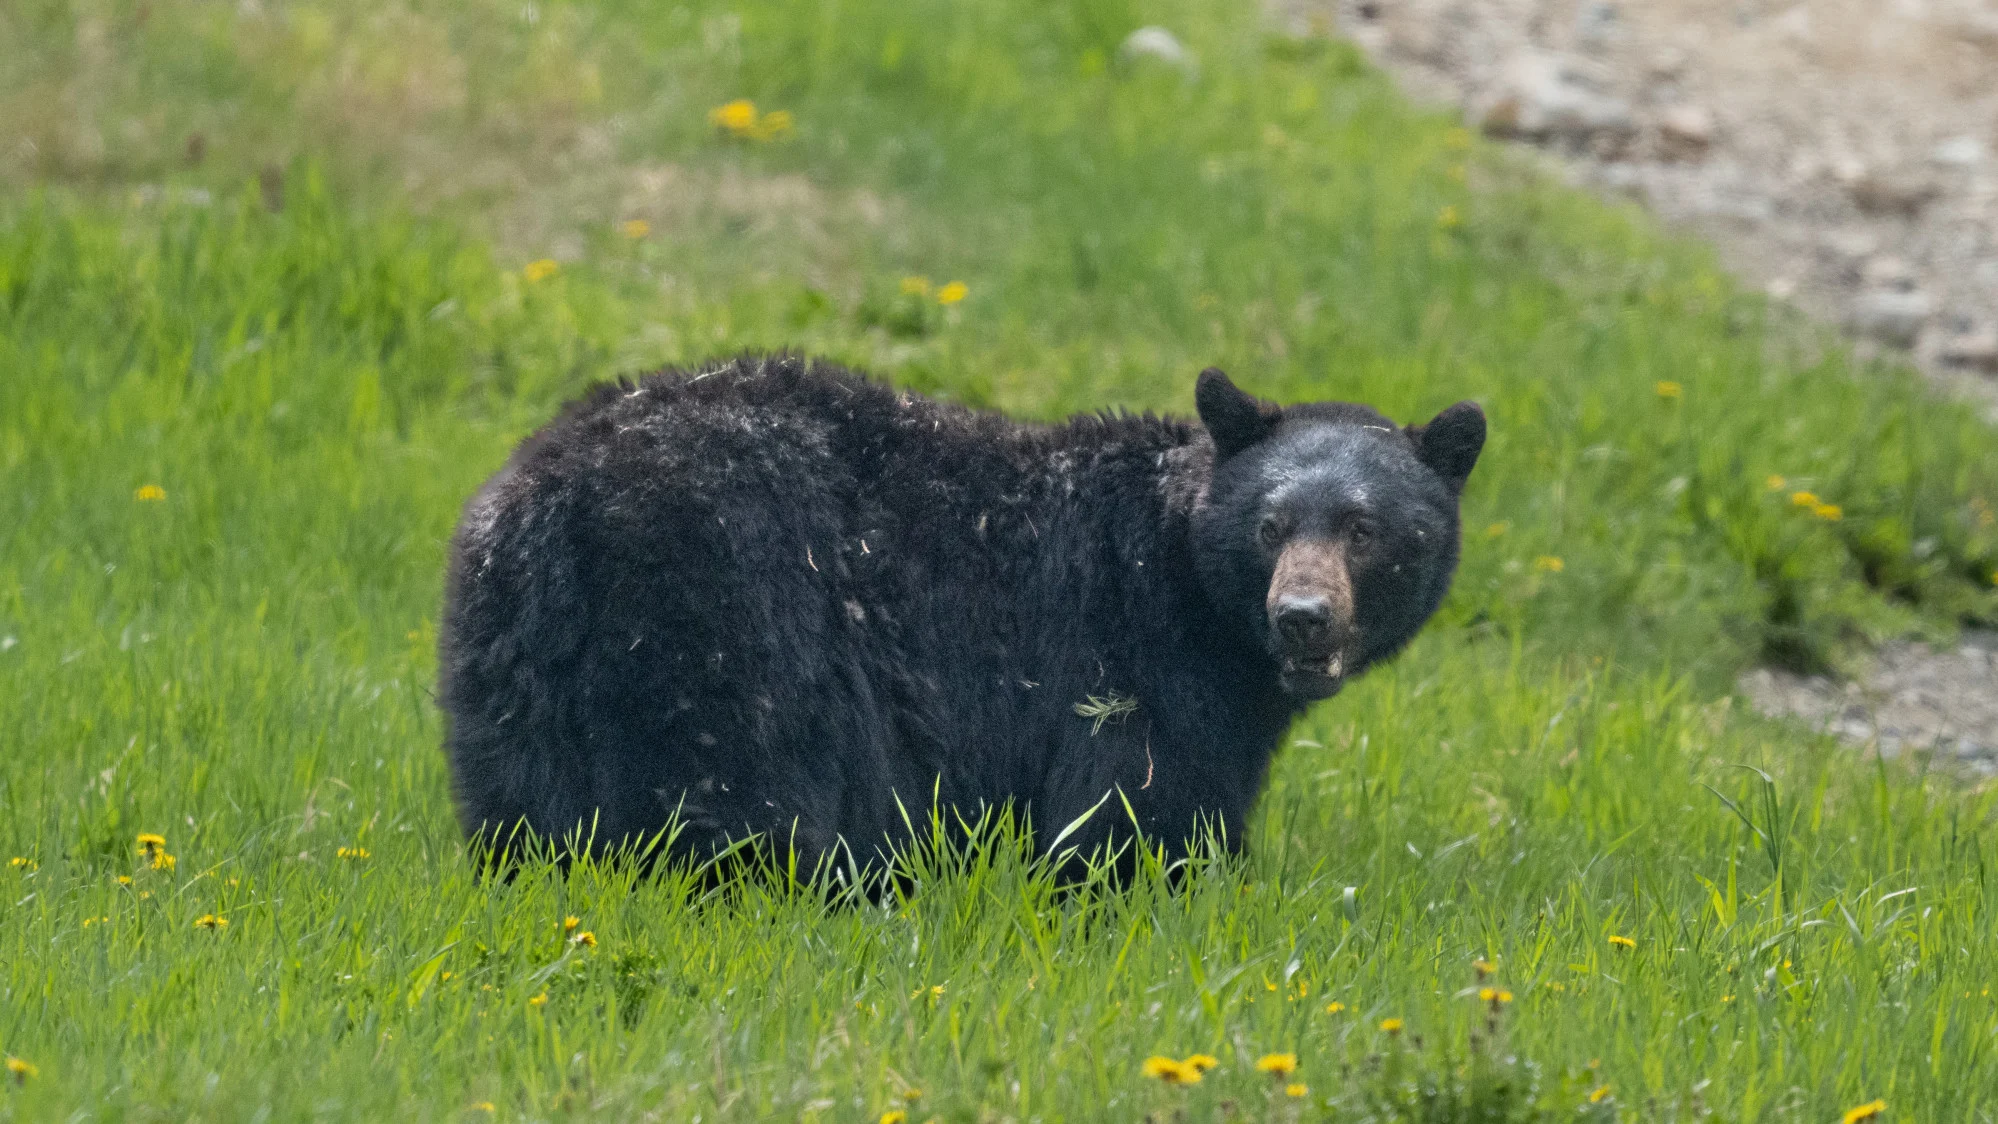 Black bears bring Whistler Blackcomb to life during the summer